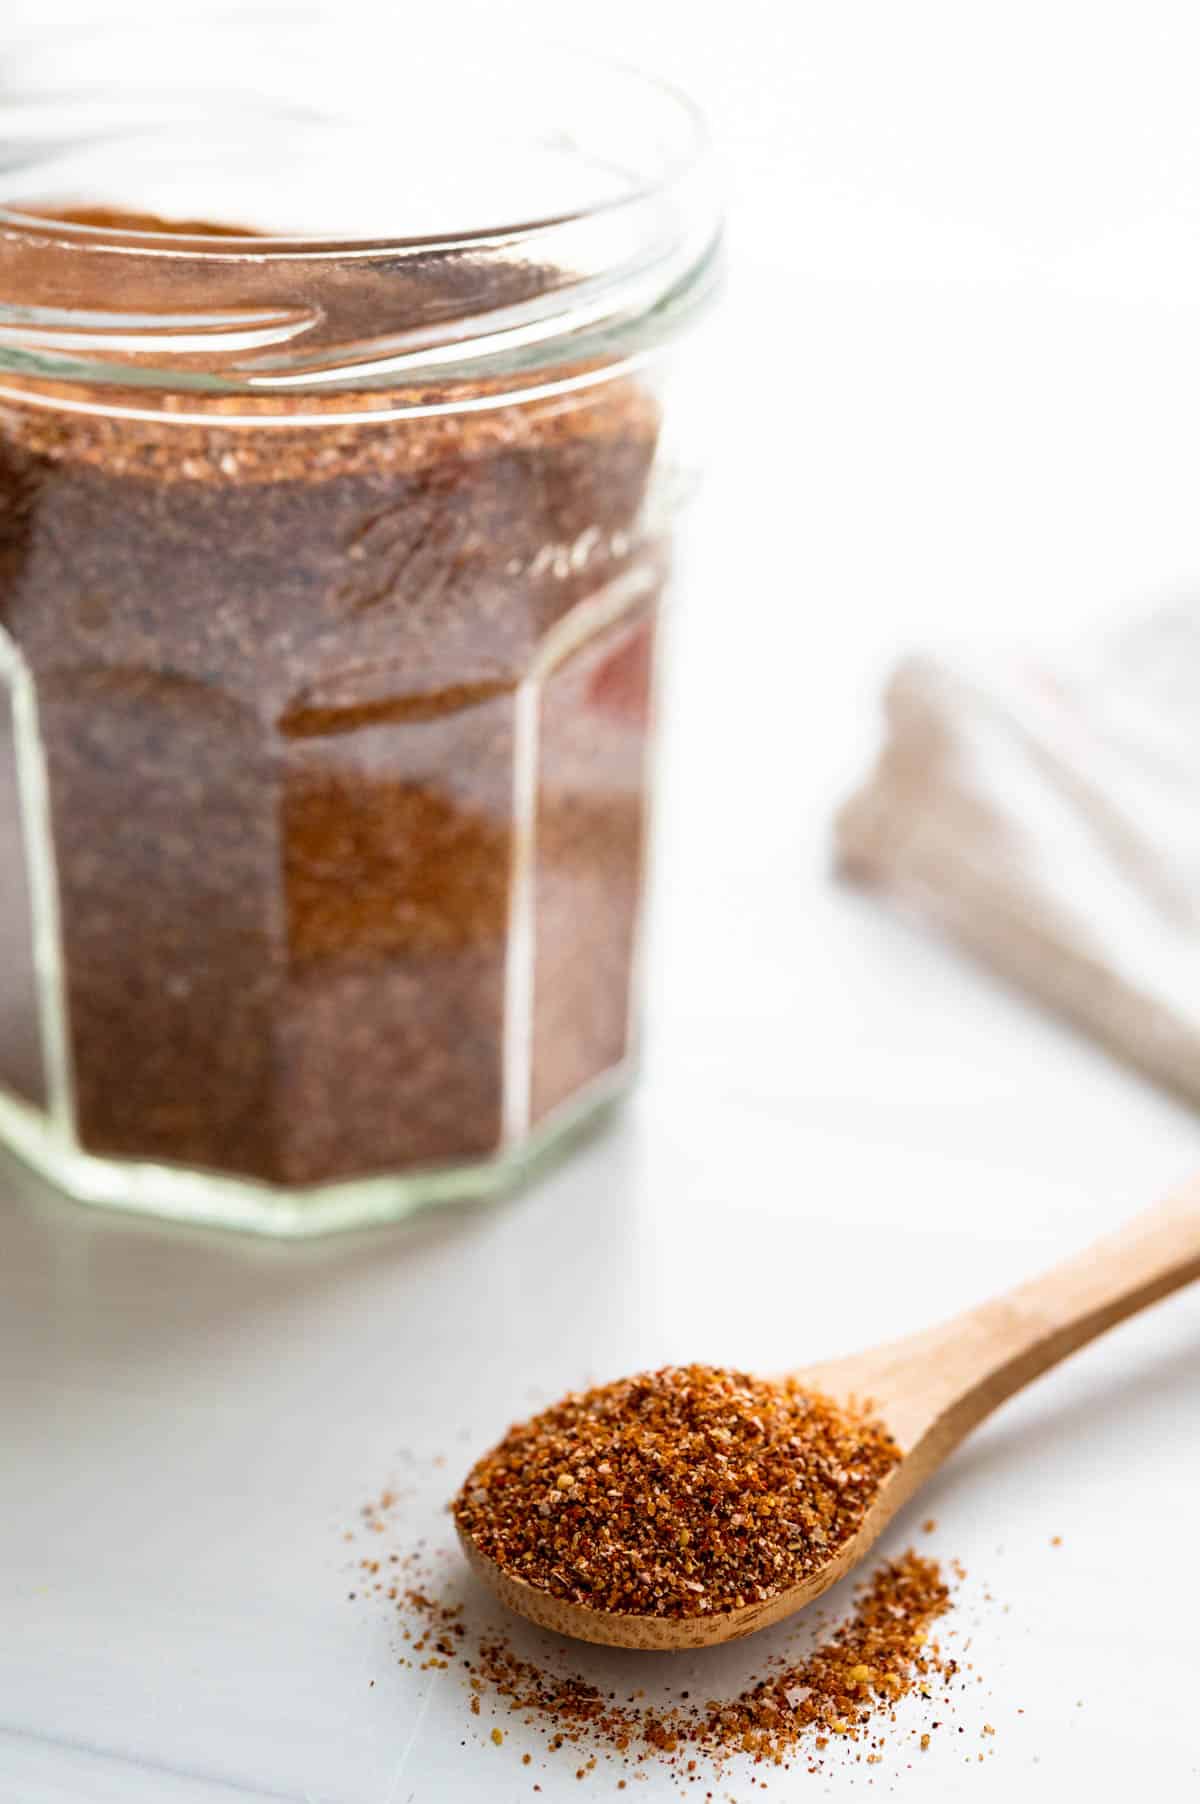 a scoop of chipotle rub seasoning mix.